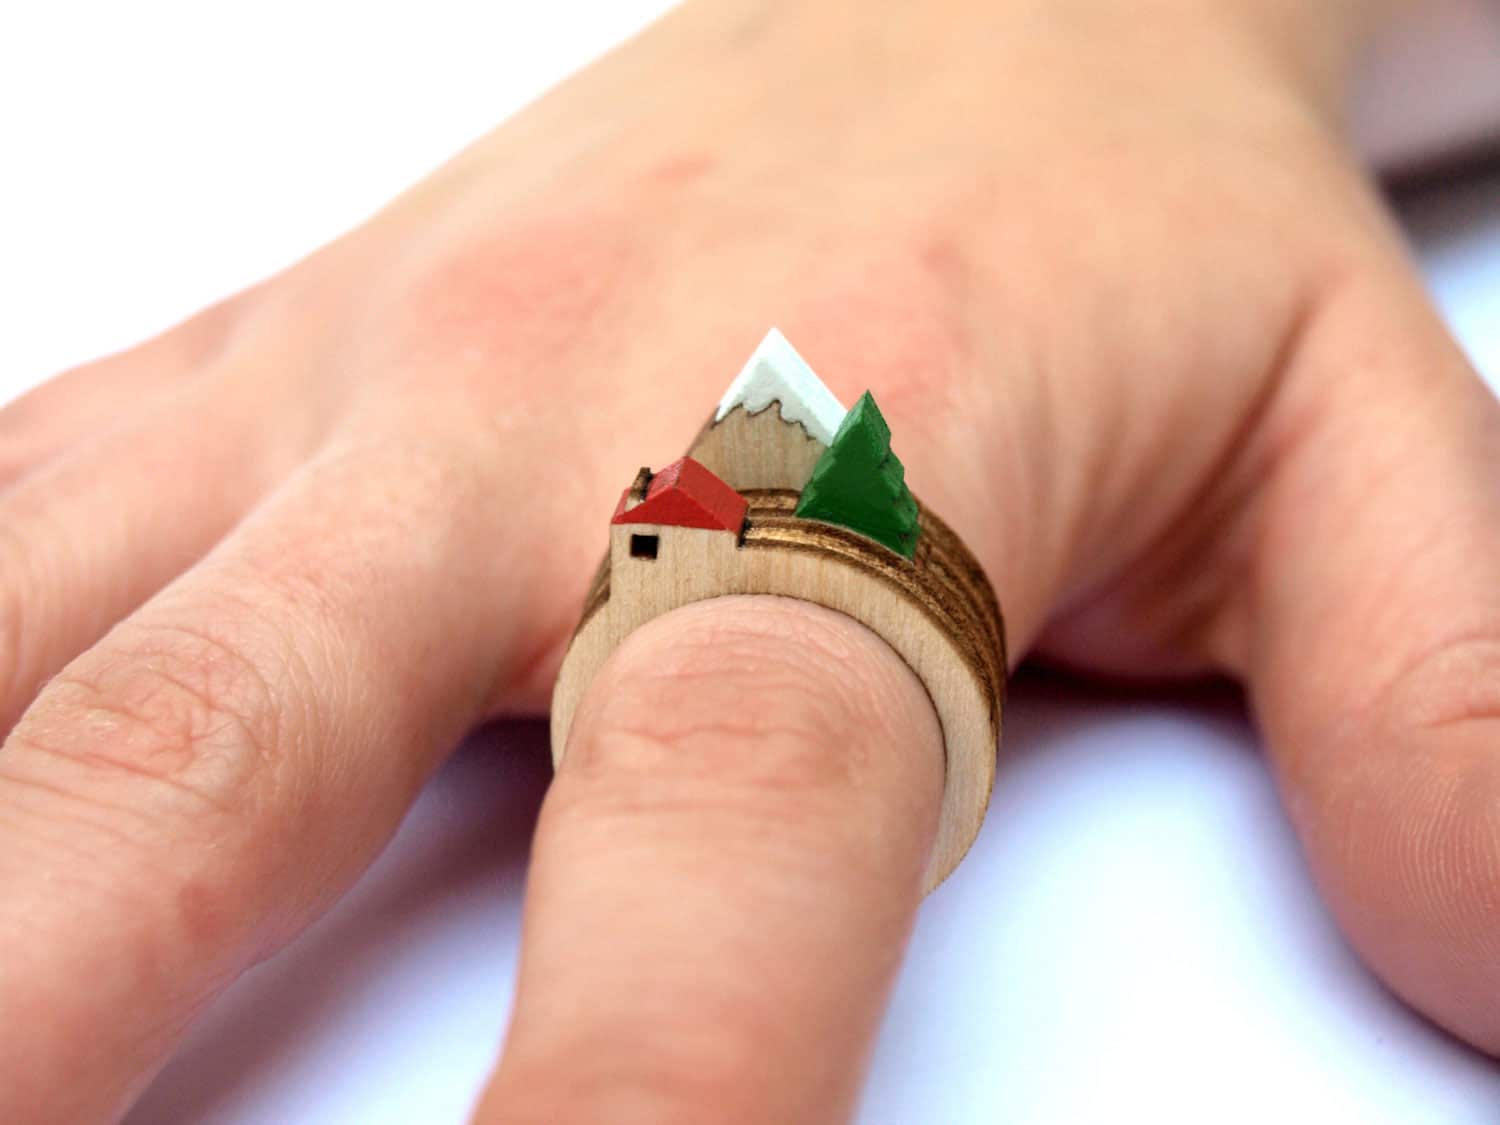 House, Tree and Mountain Ring by Clive Roddy Cool Fashion Accessory to Buy